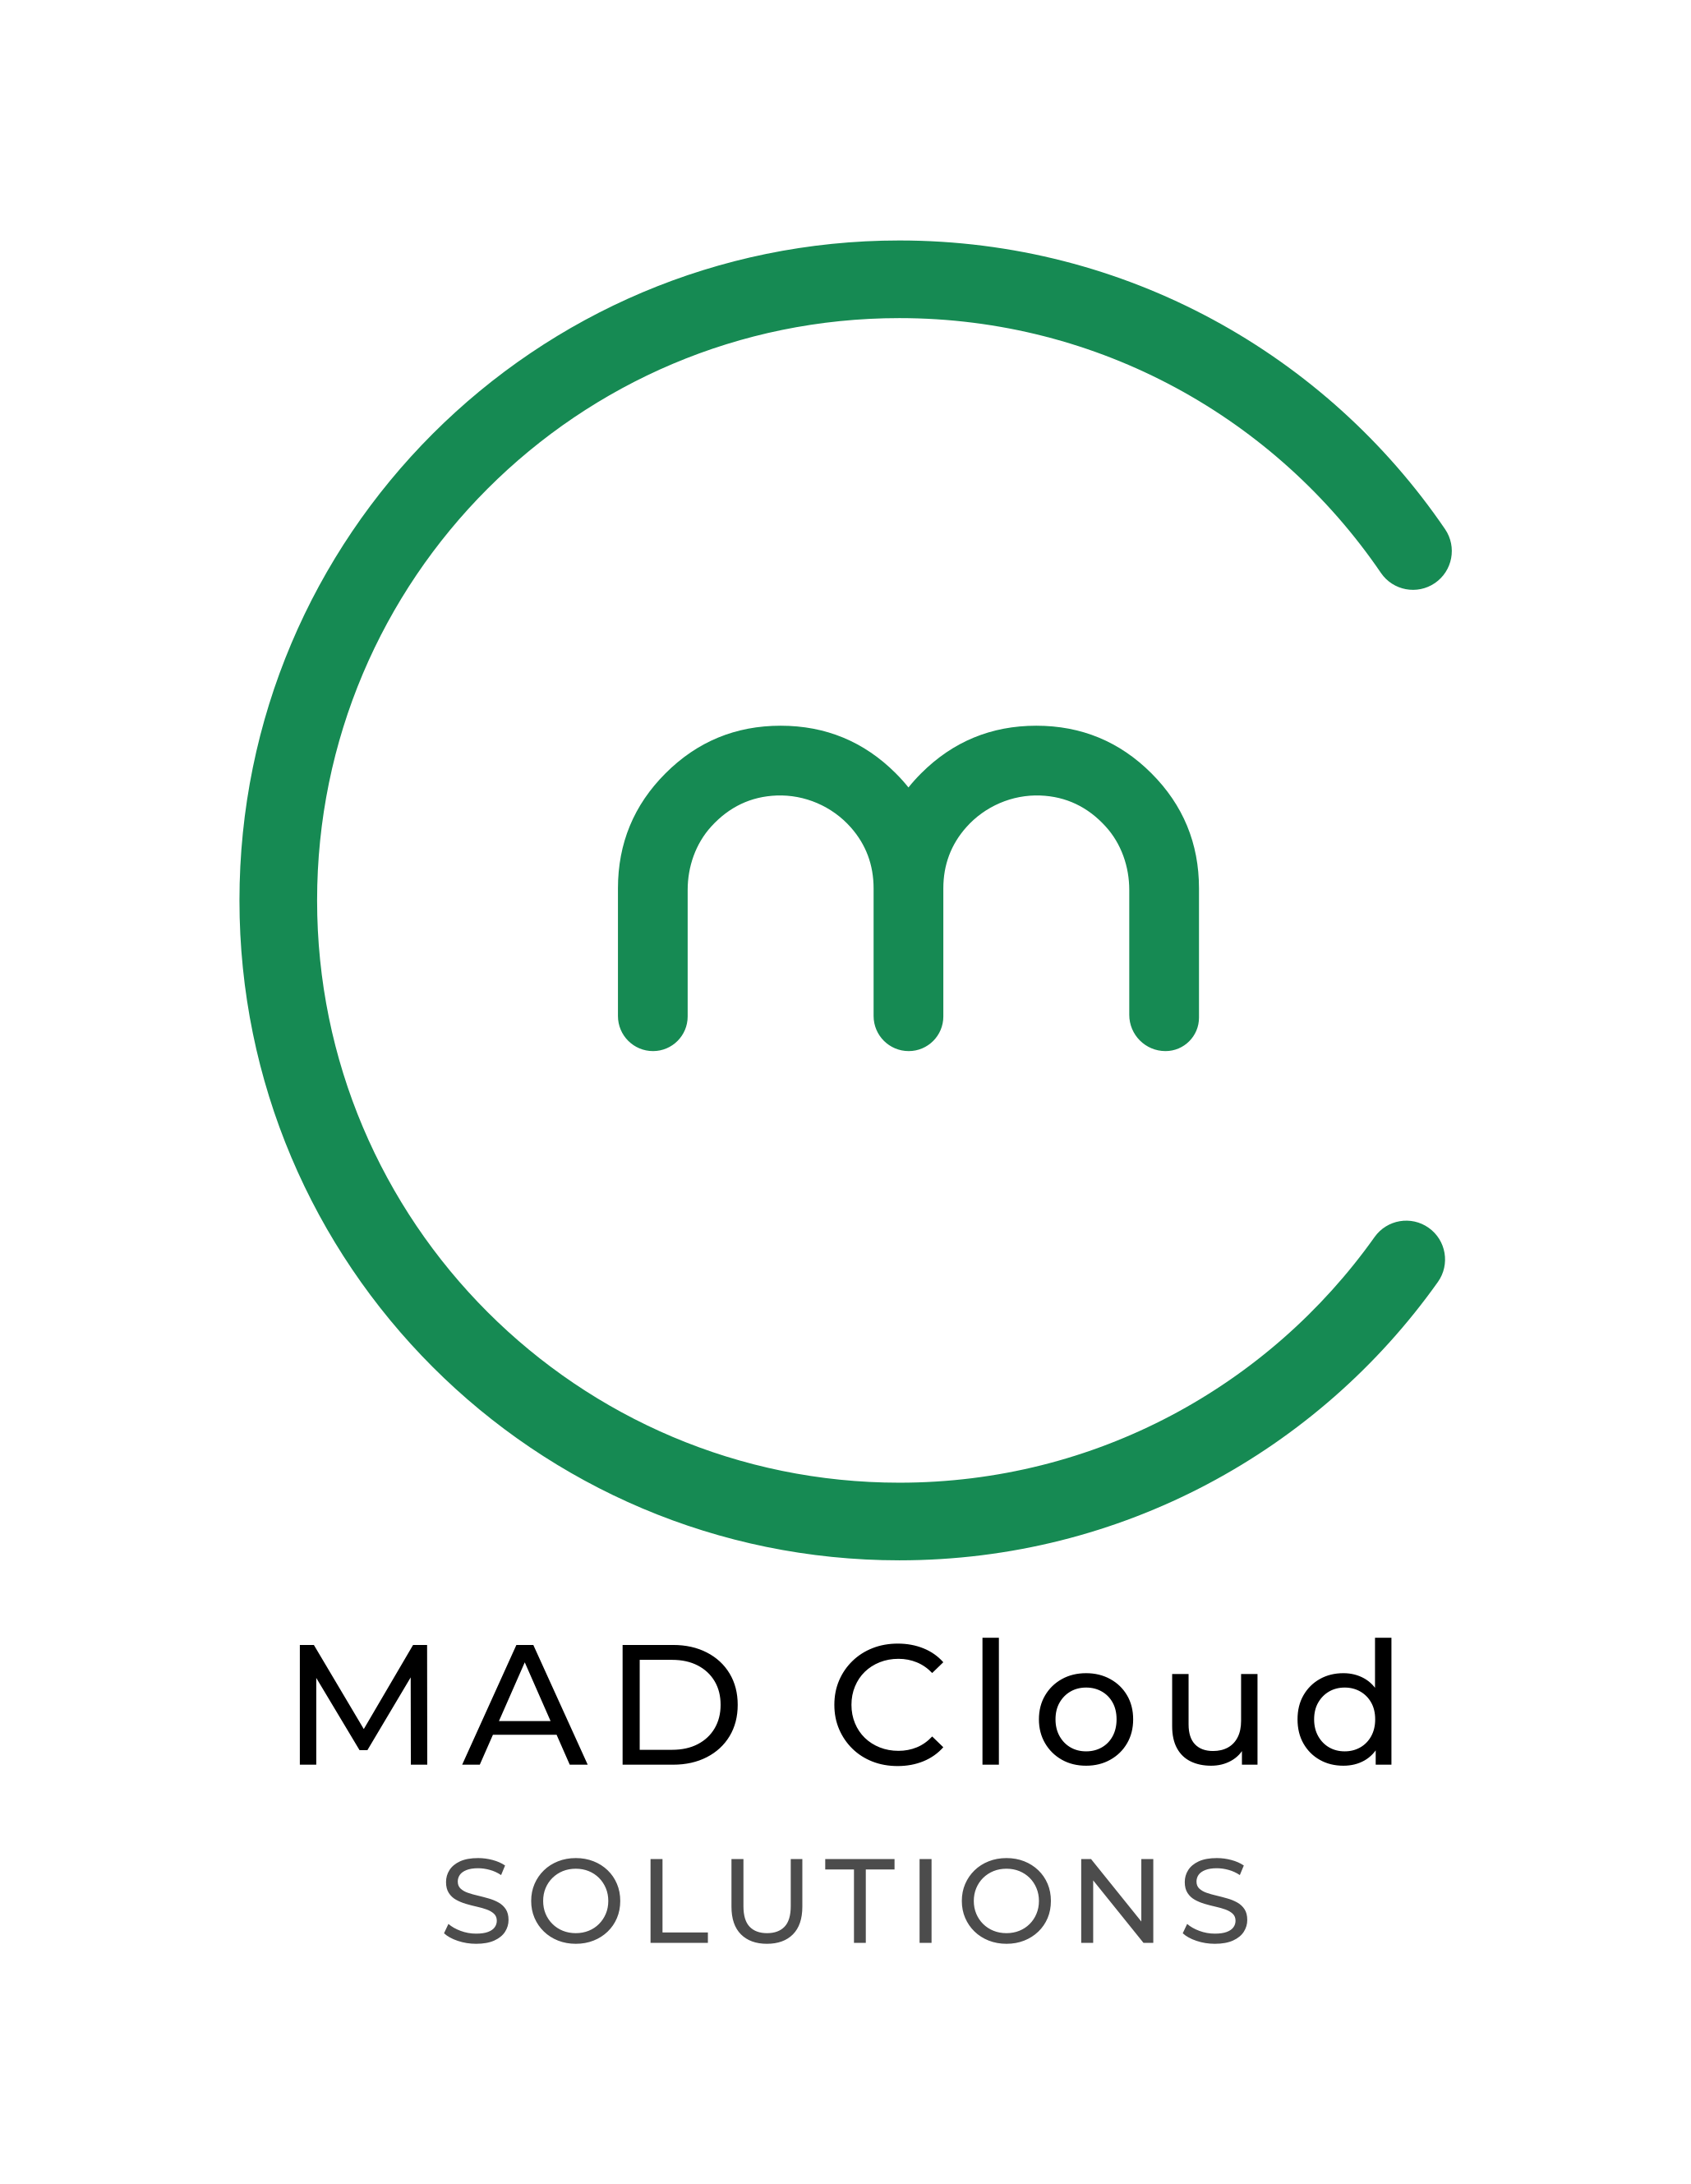 MAD Cloud Solutions